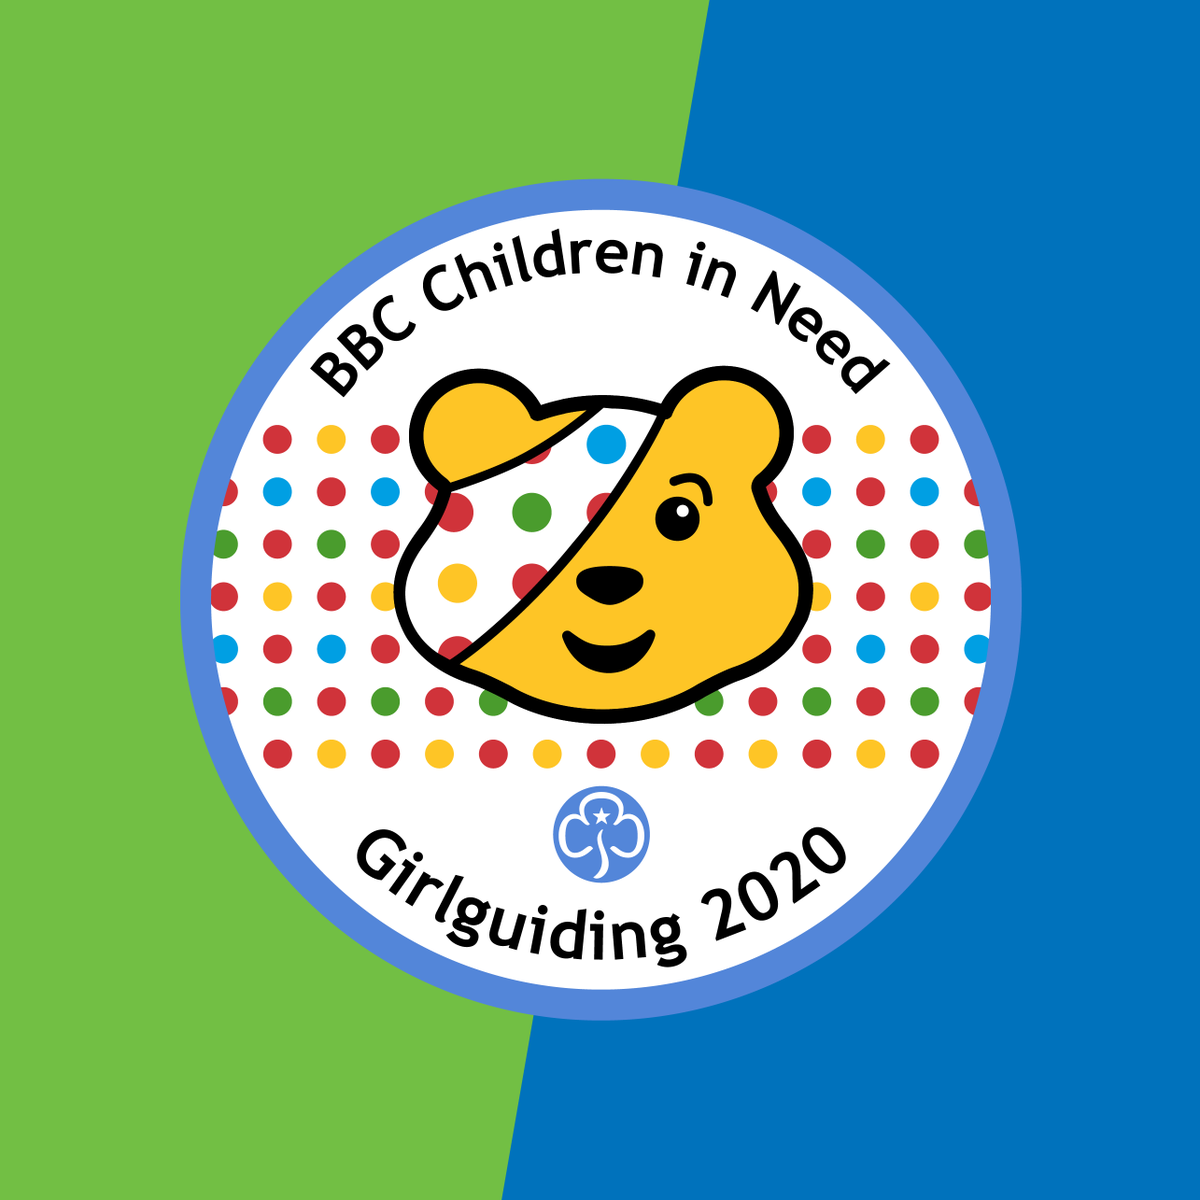 BBC CiN: Today is the day - @BBCCiN starts at 19:00 this evening on @BBCOne. As an official partner of BBC Children in Need this year, we're still inviting people to get involved with our #ActYourAge campaign.. hurry there's still time: bit.ly/32HPq7X